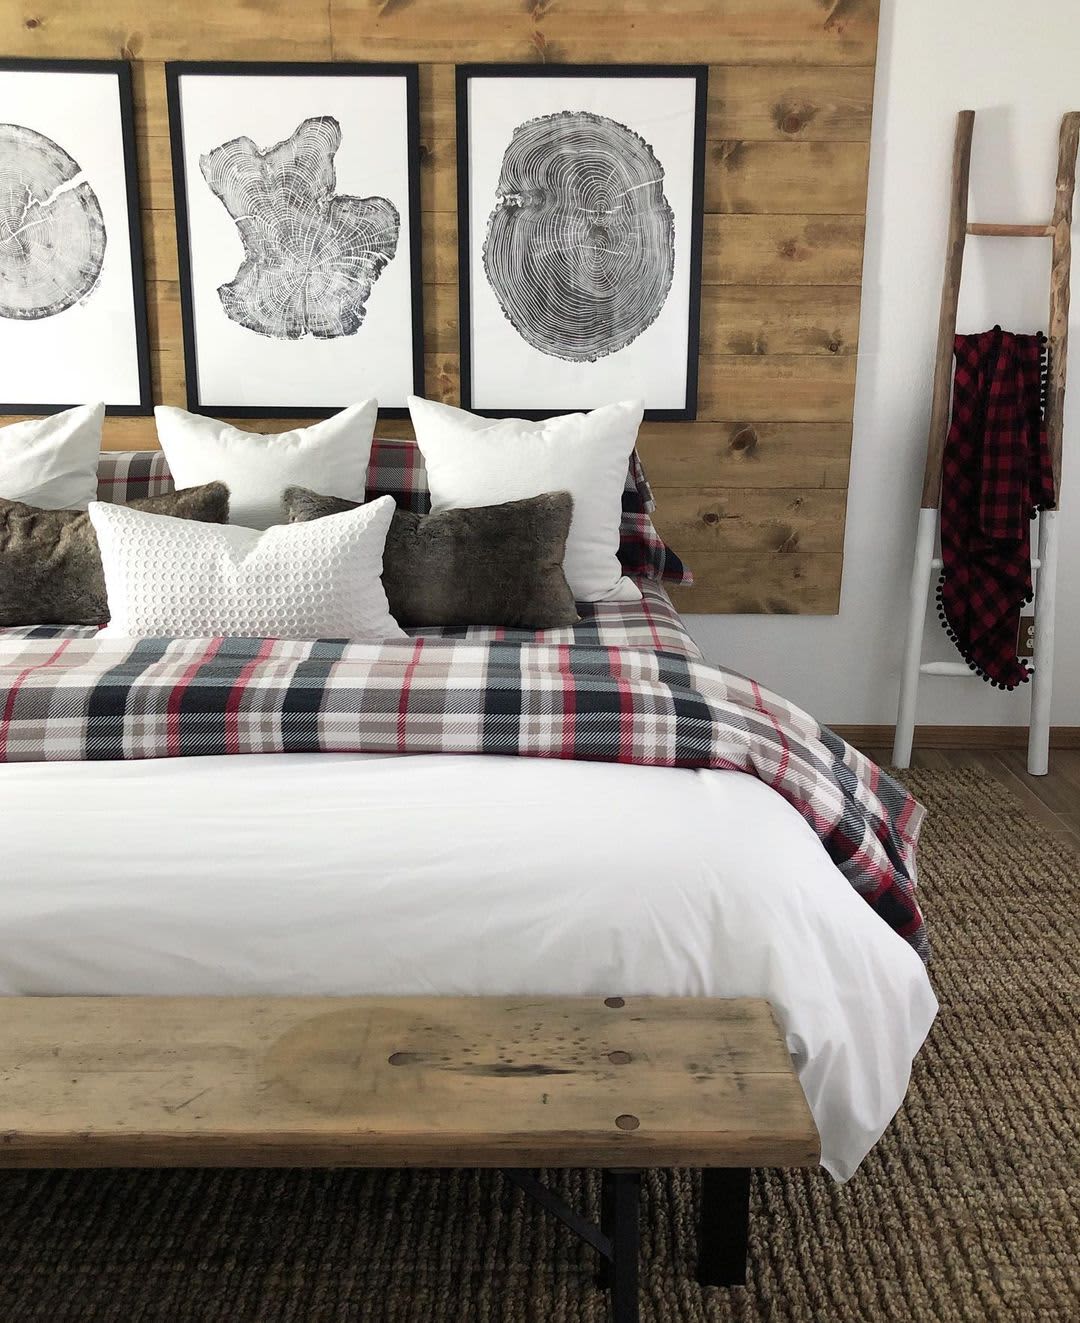 9 Antique & Vintage Bedroom Ideas For A Modern Farmhouse Style